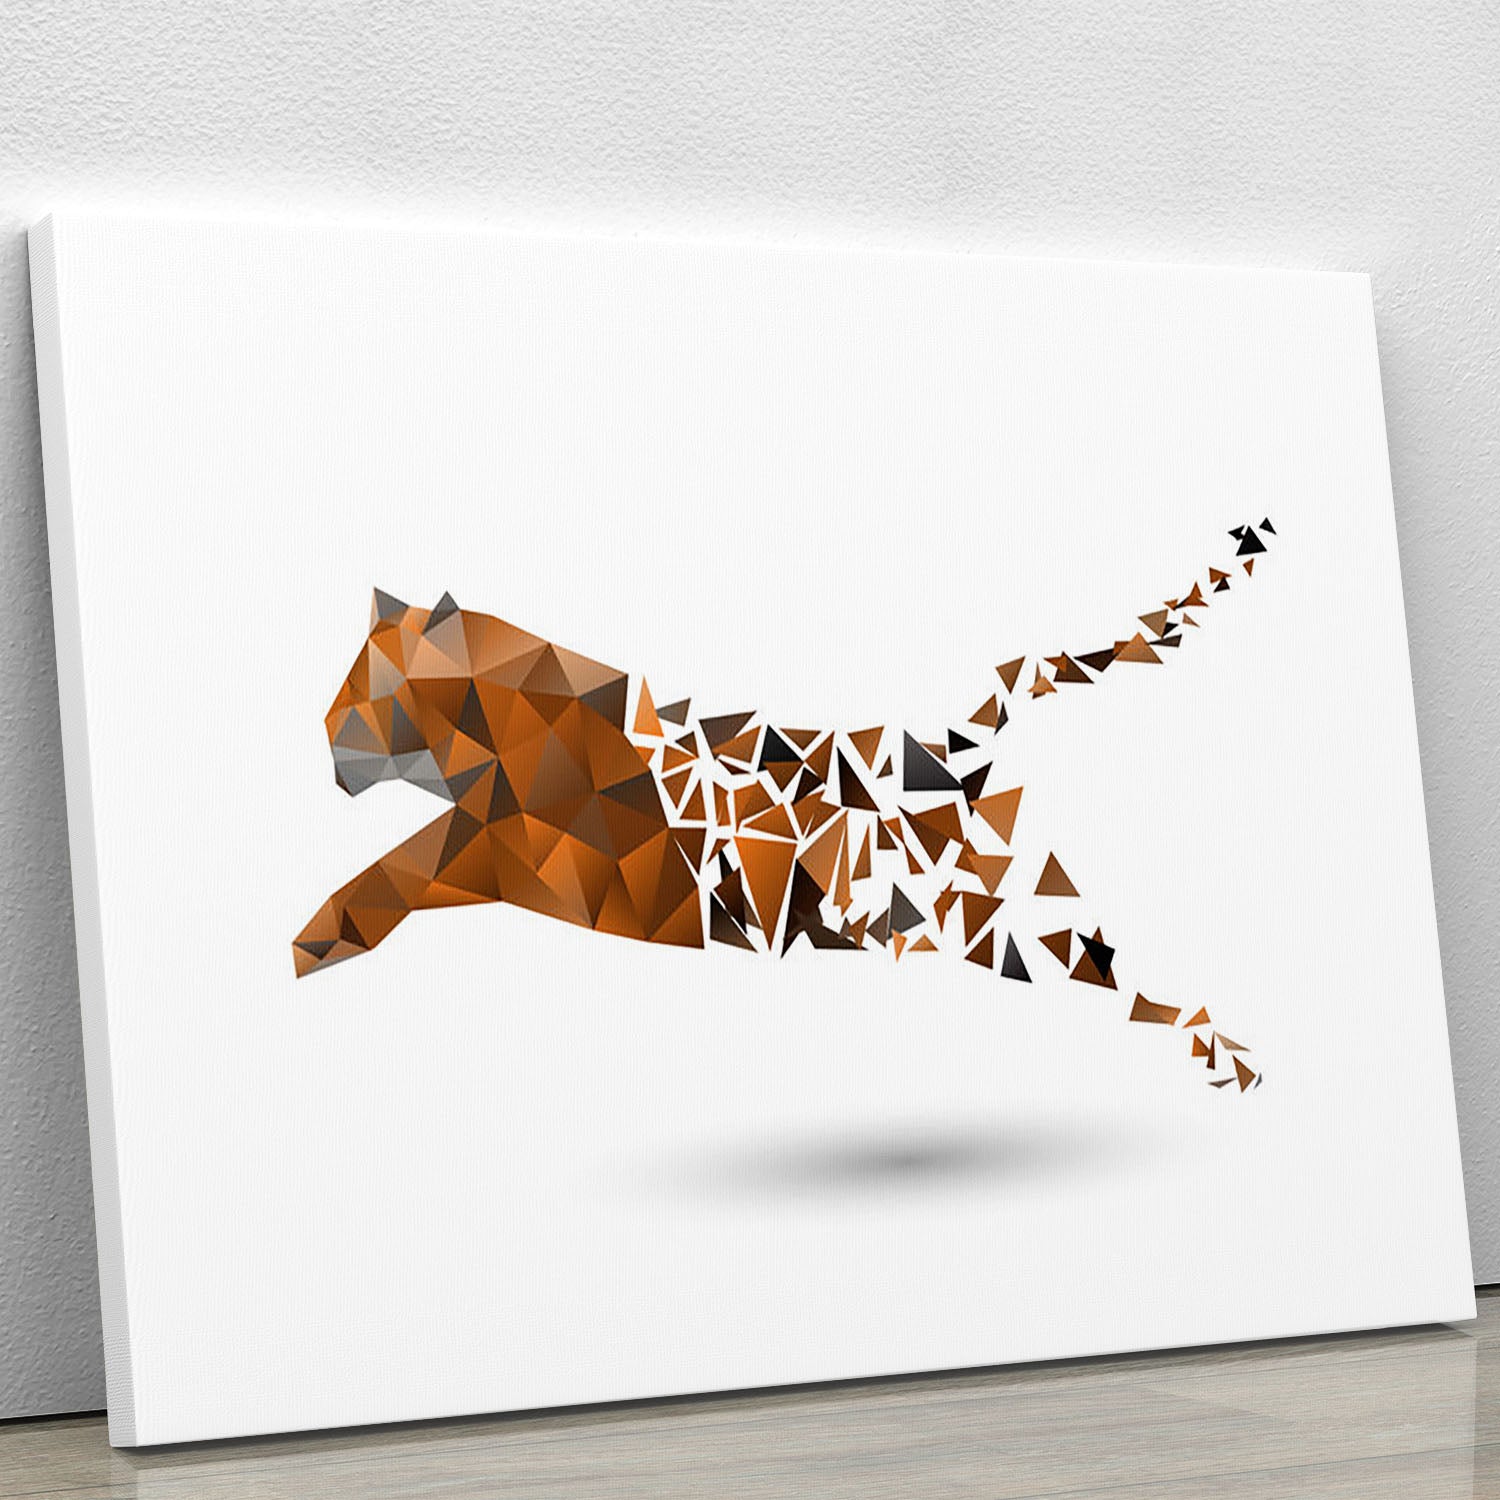 Leaping tiger made from polygons Canvas Print or Poster - Canvas Art Rocks - 1